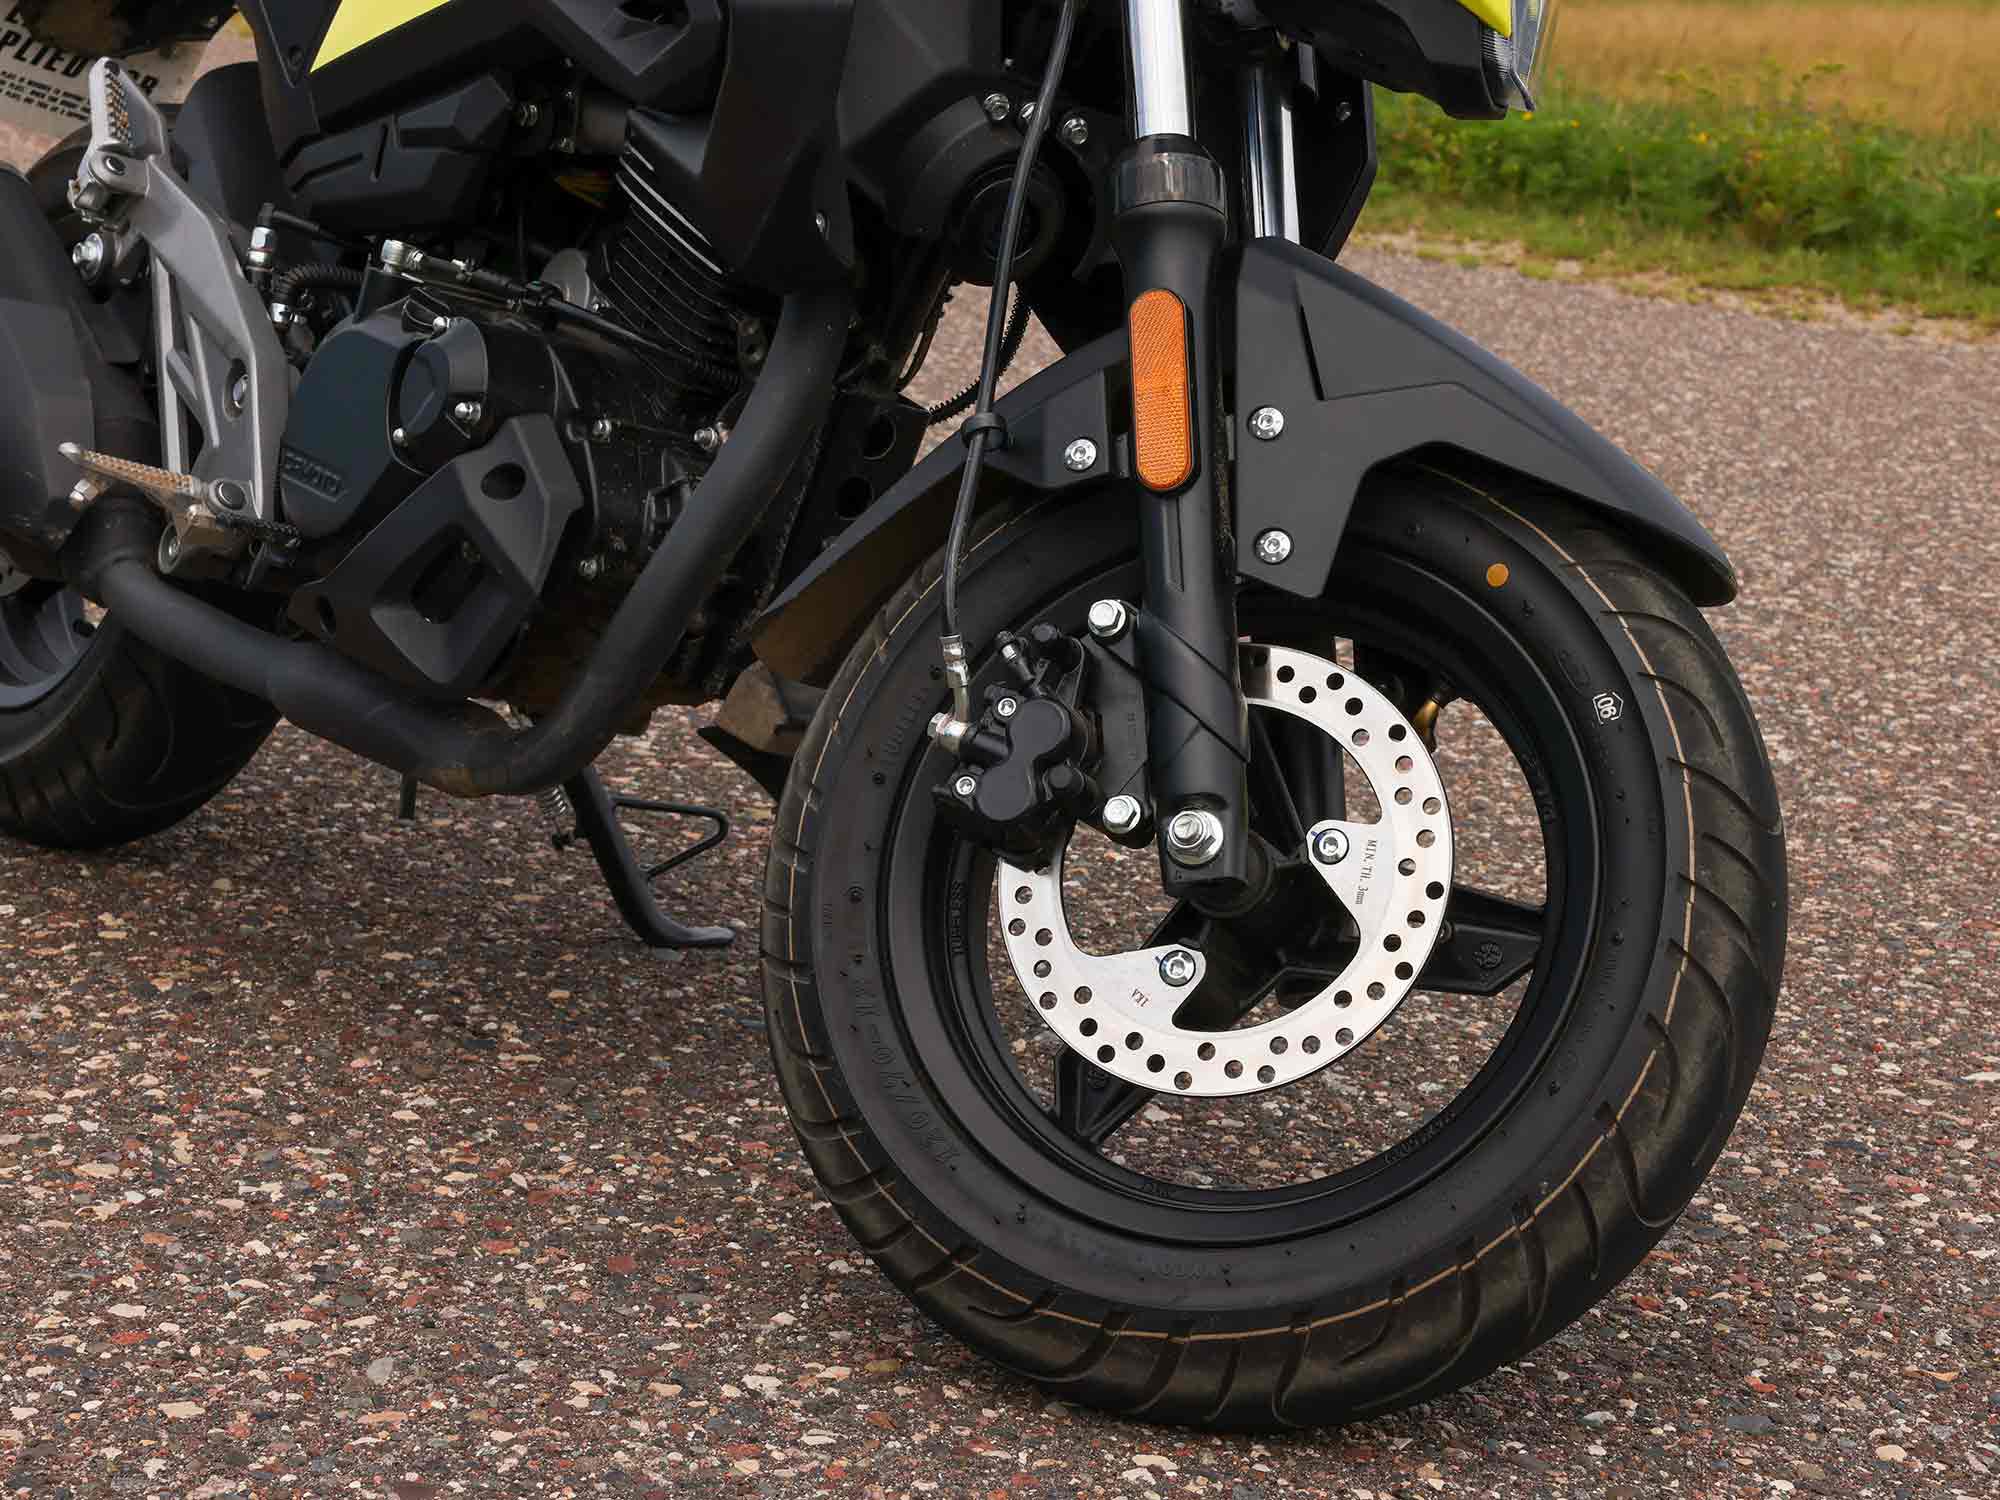 The Papio is close in spec to the Honda Grom and Kawasaki Z125 Pro. For example, the front brake disc is 210mm. That’s 10mm smaller than the Honda’s brake disc, but 10mm larger than the Kawaski’s.